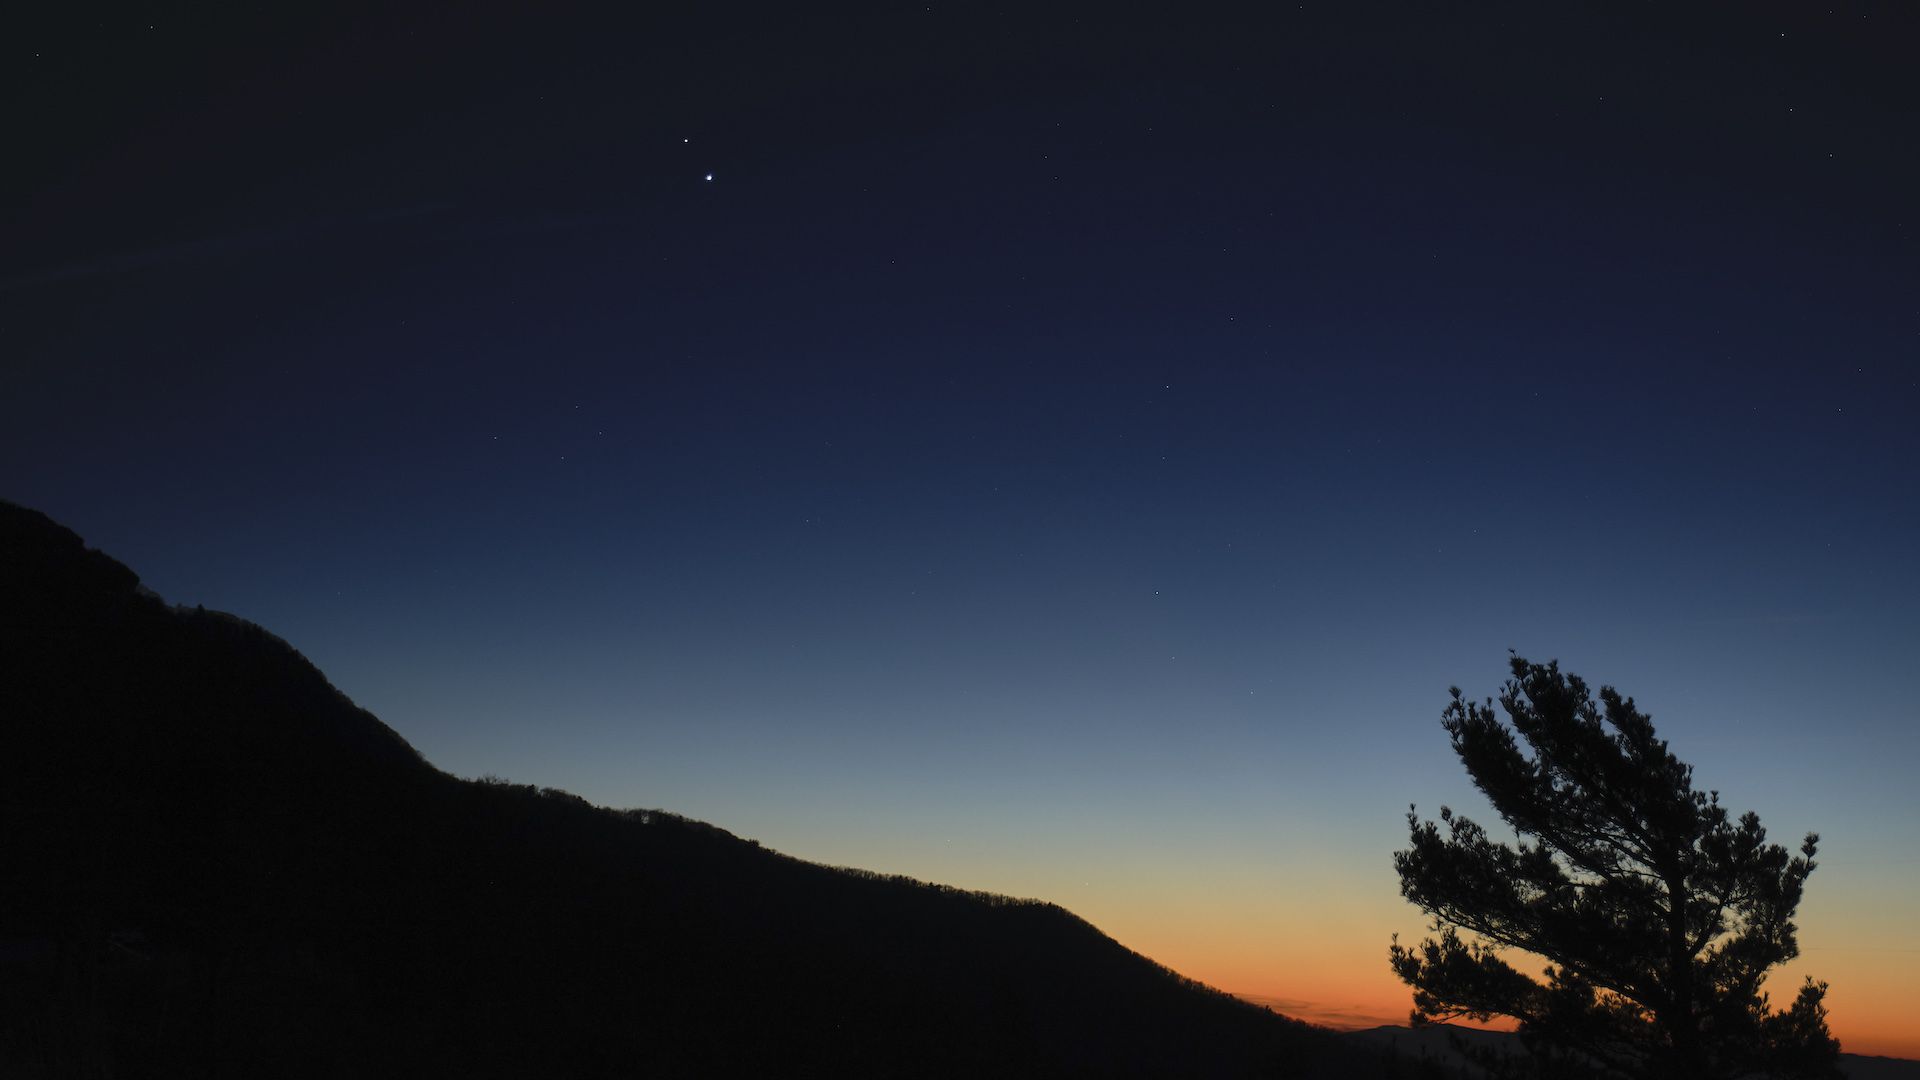 Jupiter and Saturn seen shining like pinpoints of light, close together as the Sun sets behind a mountain and a gnarled tree